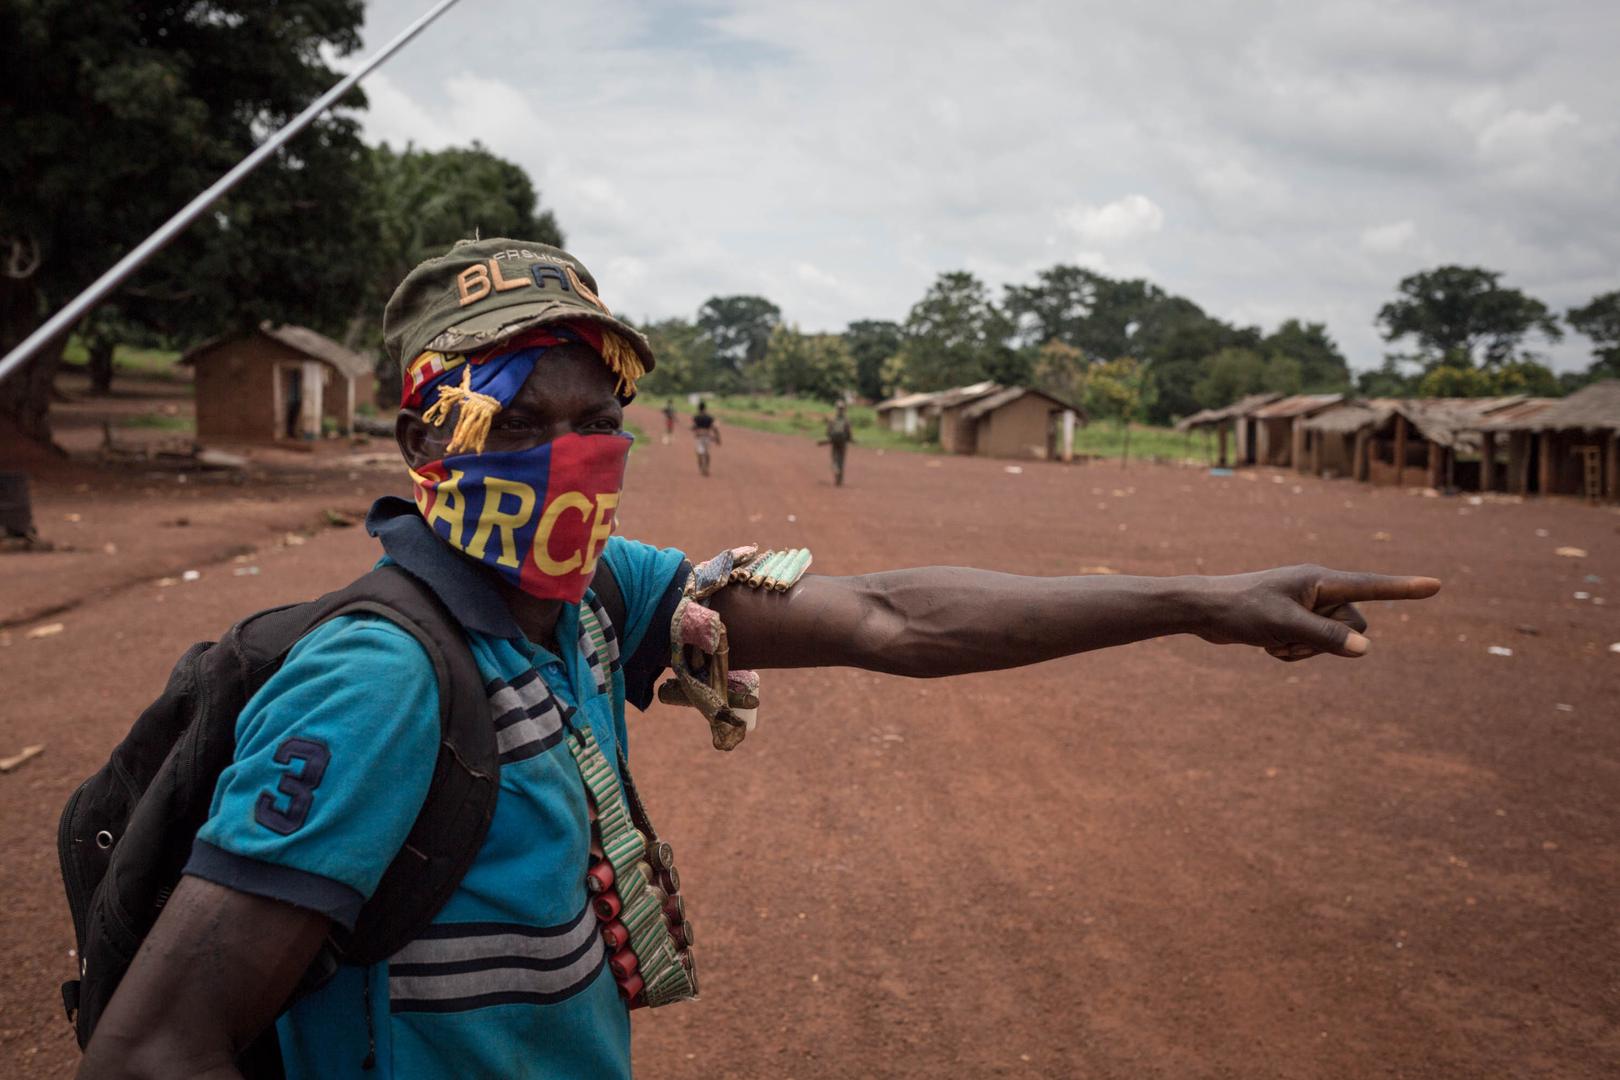 A Moment for Justice in the Central African Republic